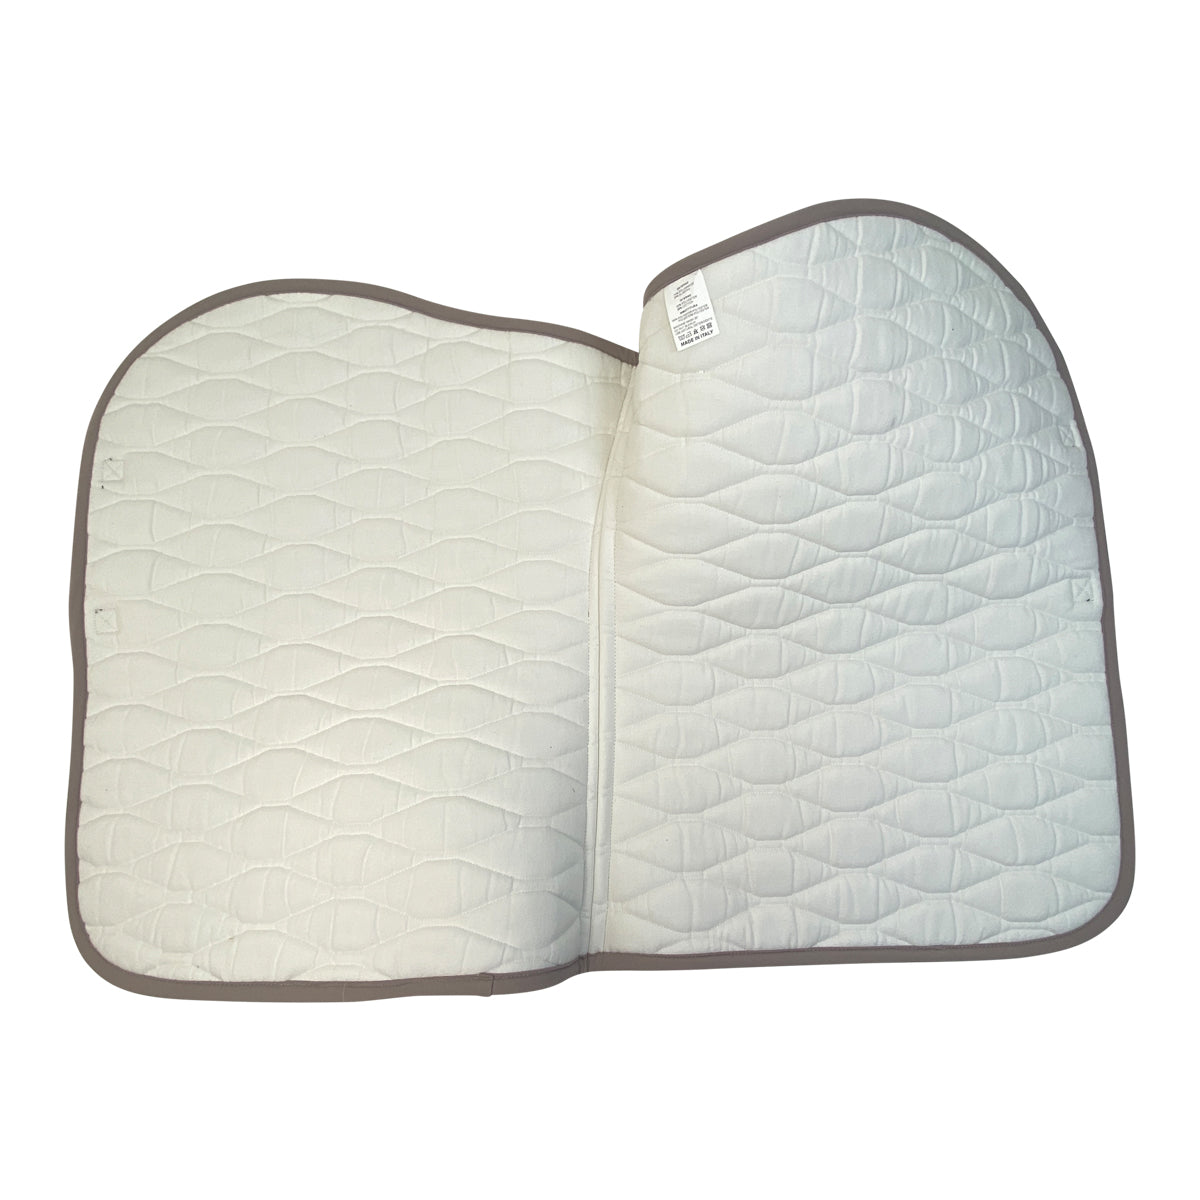 Equiline Microstud Logo Tech Saddle Pad in Sand - Full